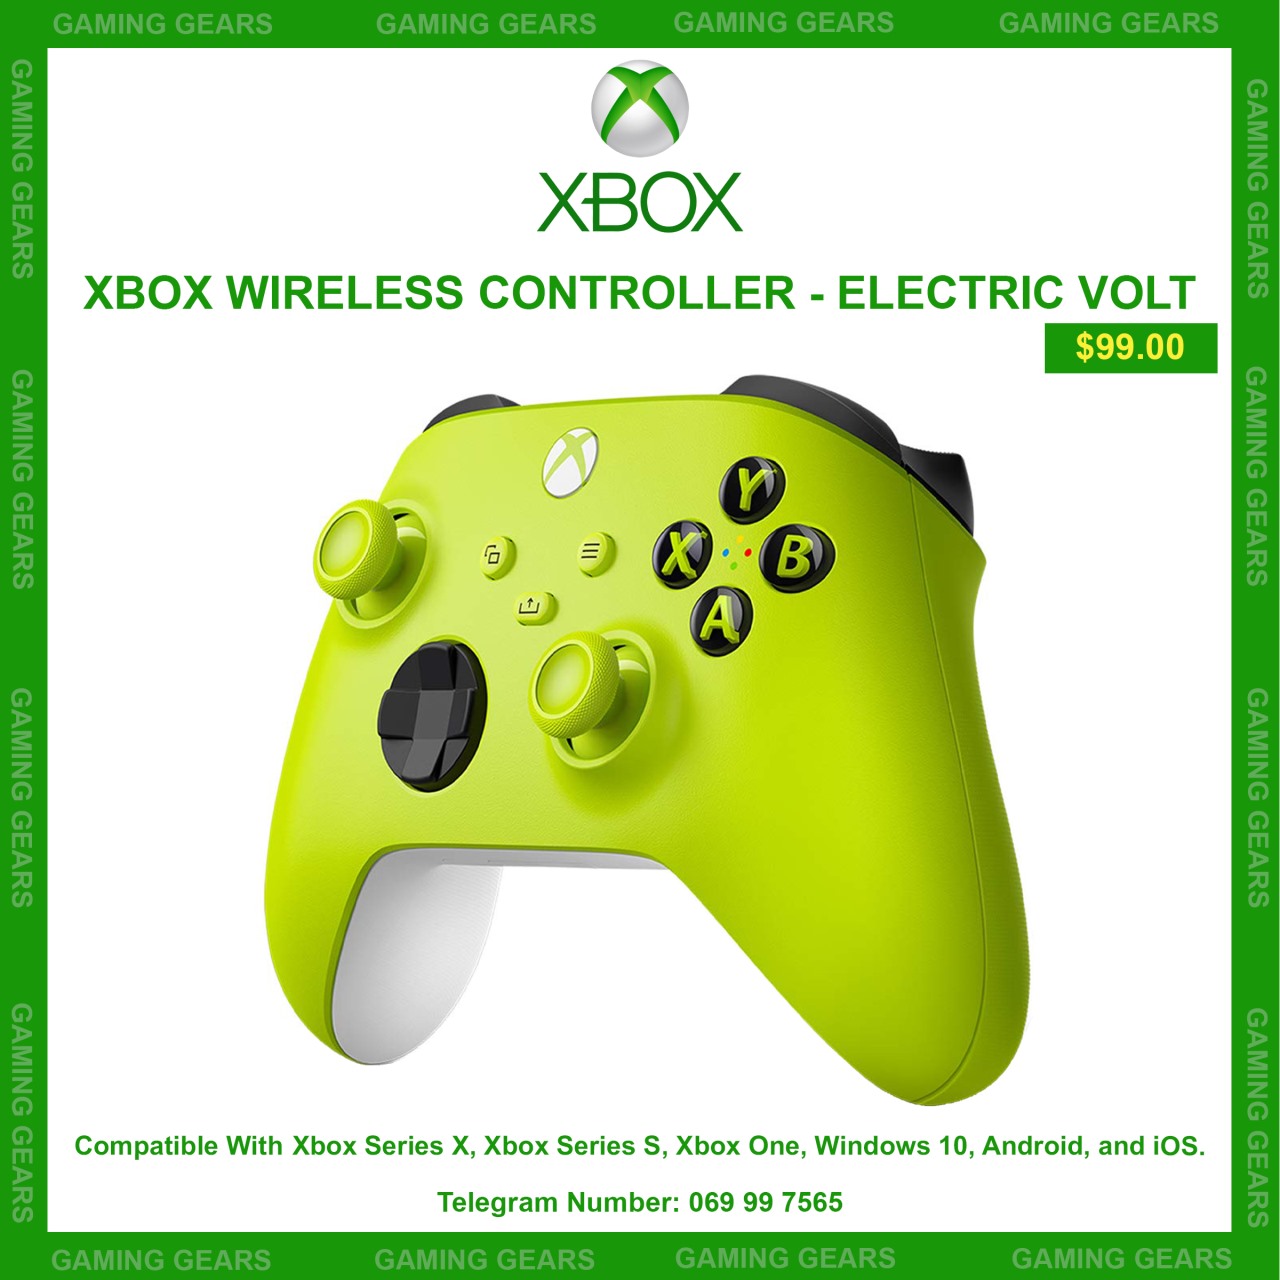 XBOX WIRELESS CONTROLLER Gaming - Gaming - in Best VOLT ELECTRIC Shop Gears - Gears